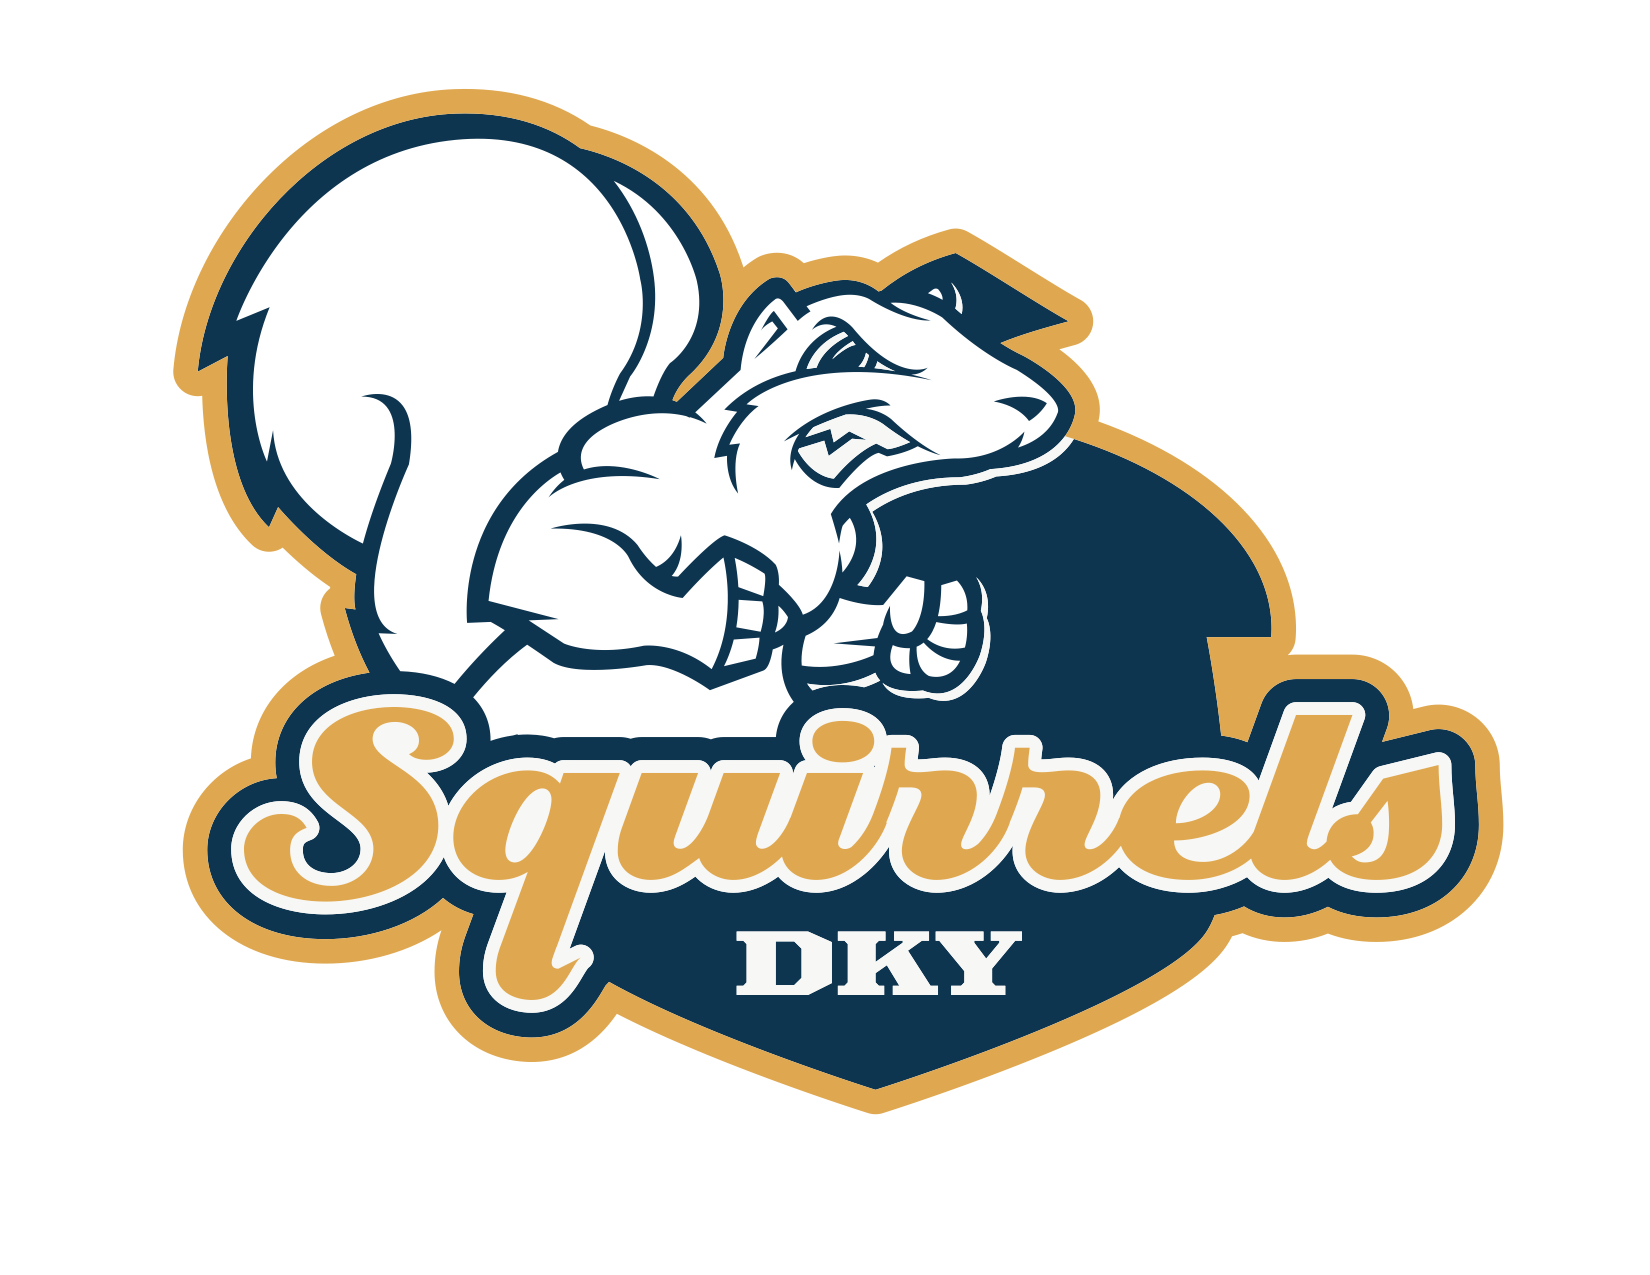 squirrel drawing with DKY logo